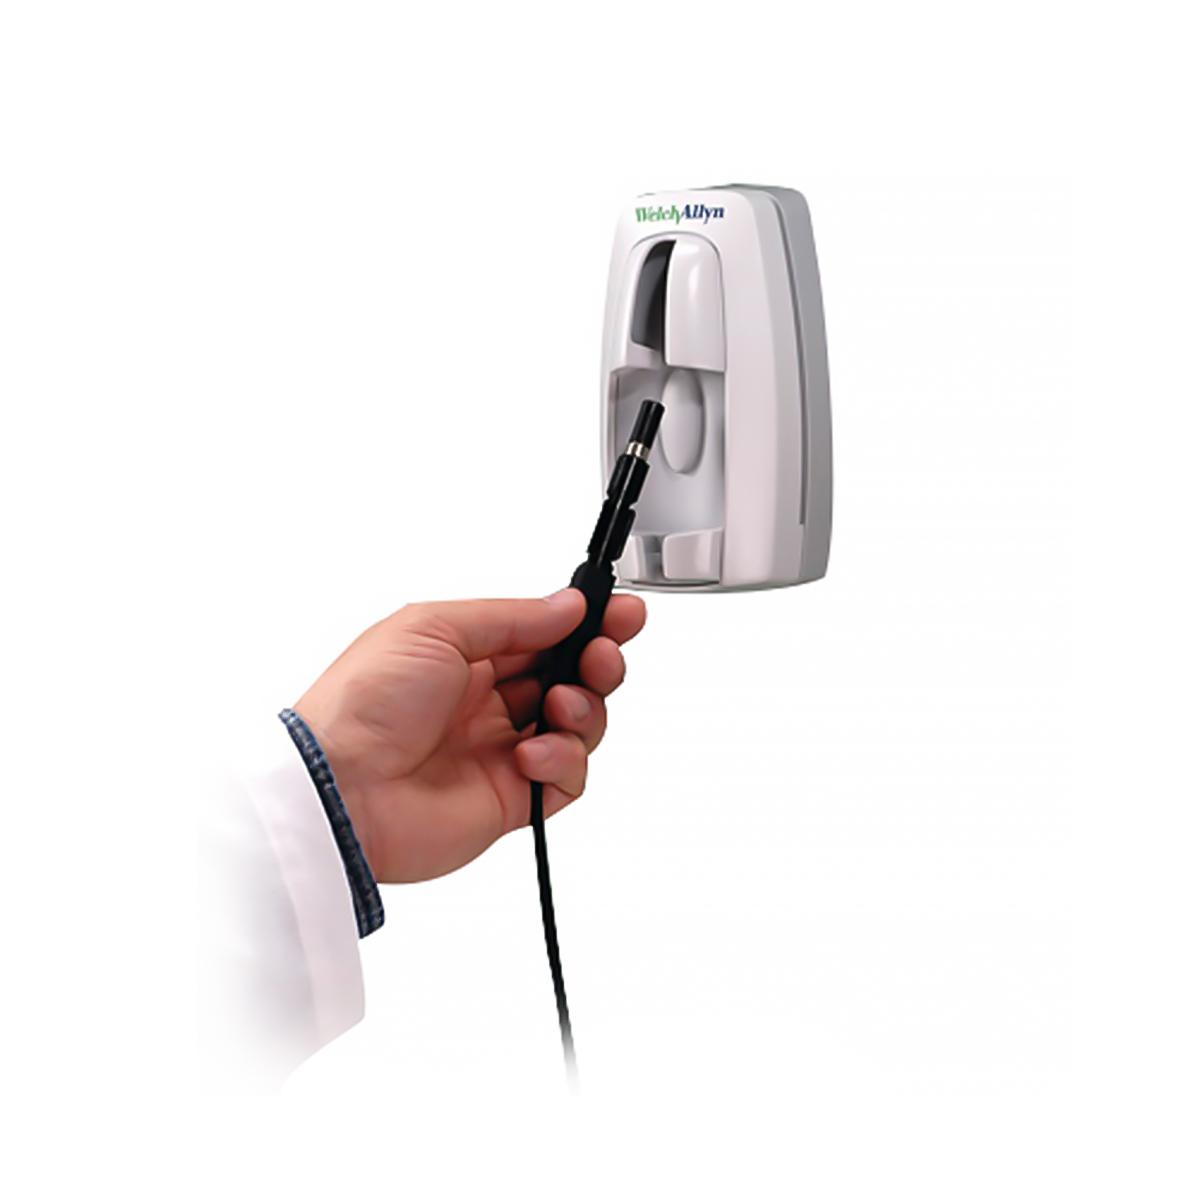 A clinician inserts the 78800 Series KleenSpec Corded Illumination System into its wall-mounted storage system